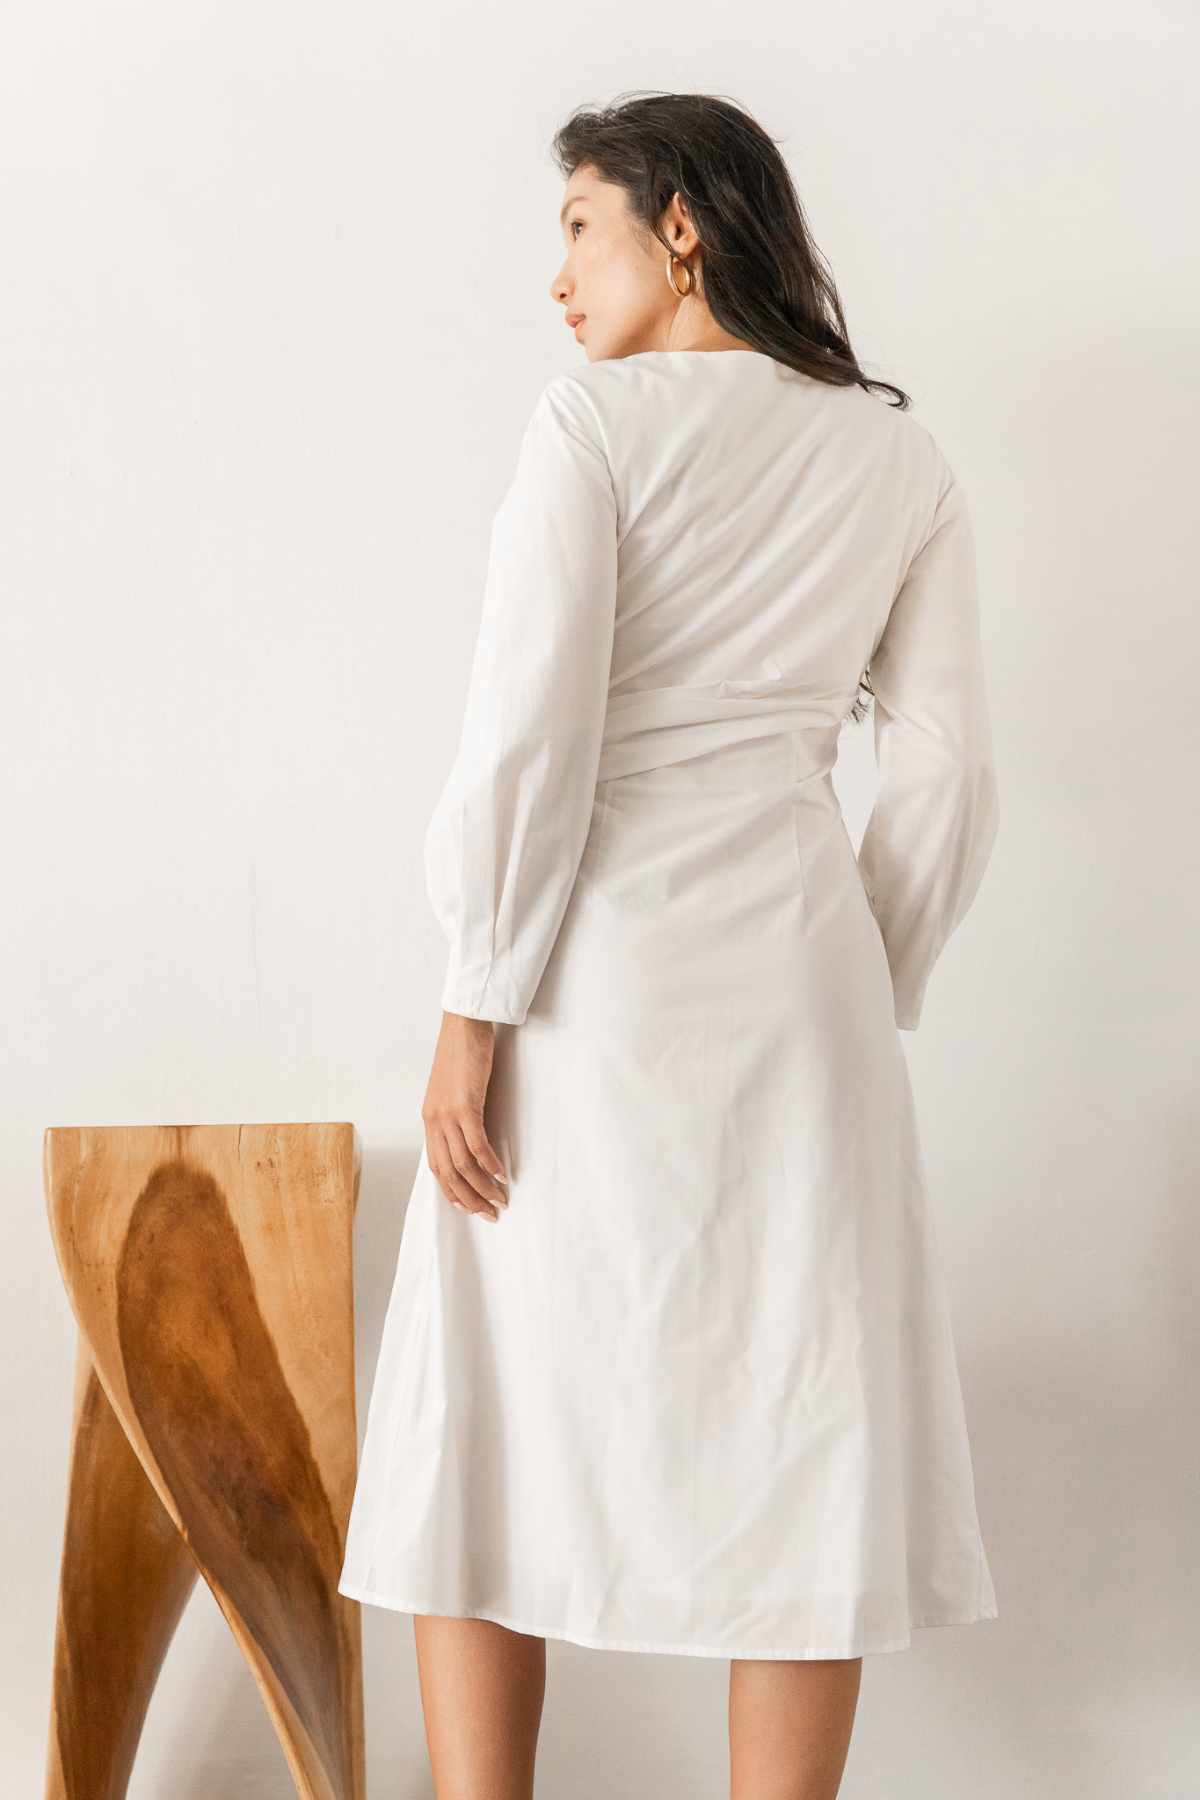 Su By Hand Vanda Dress in White, available on ZERRIN with free Singapore shipping